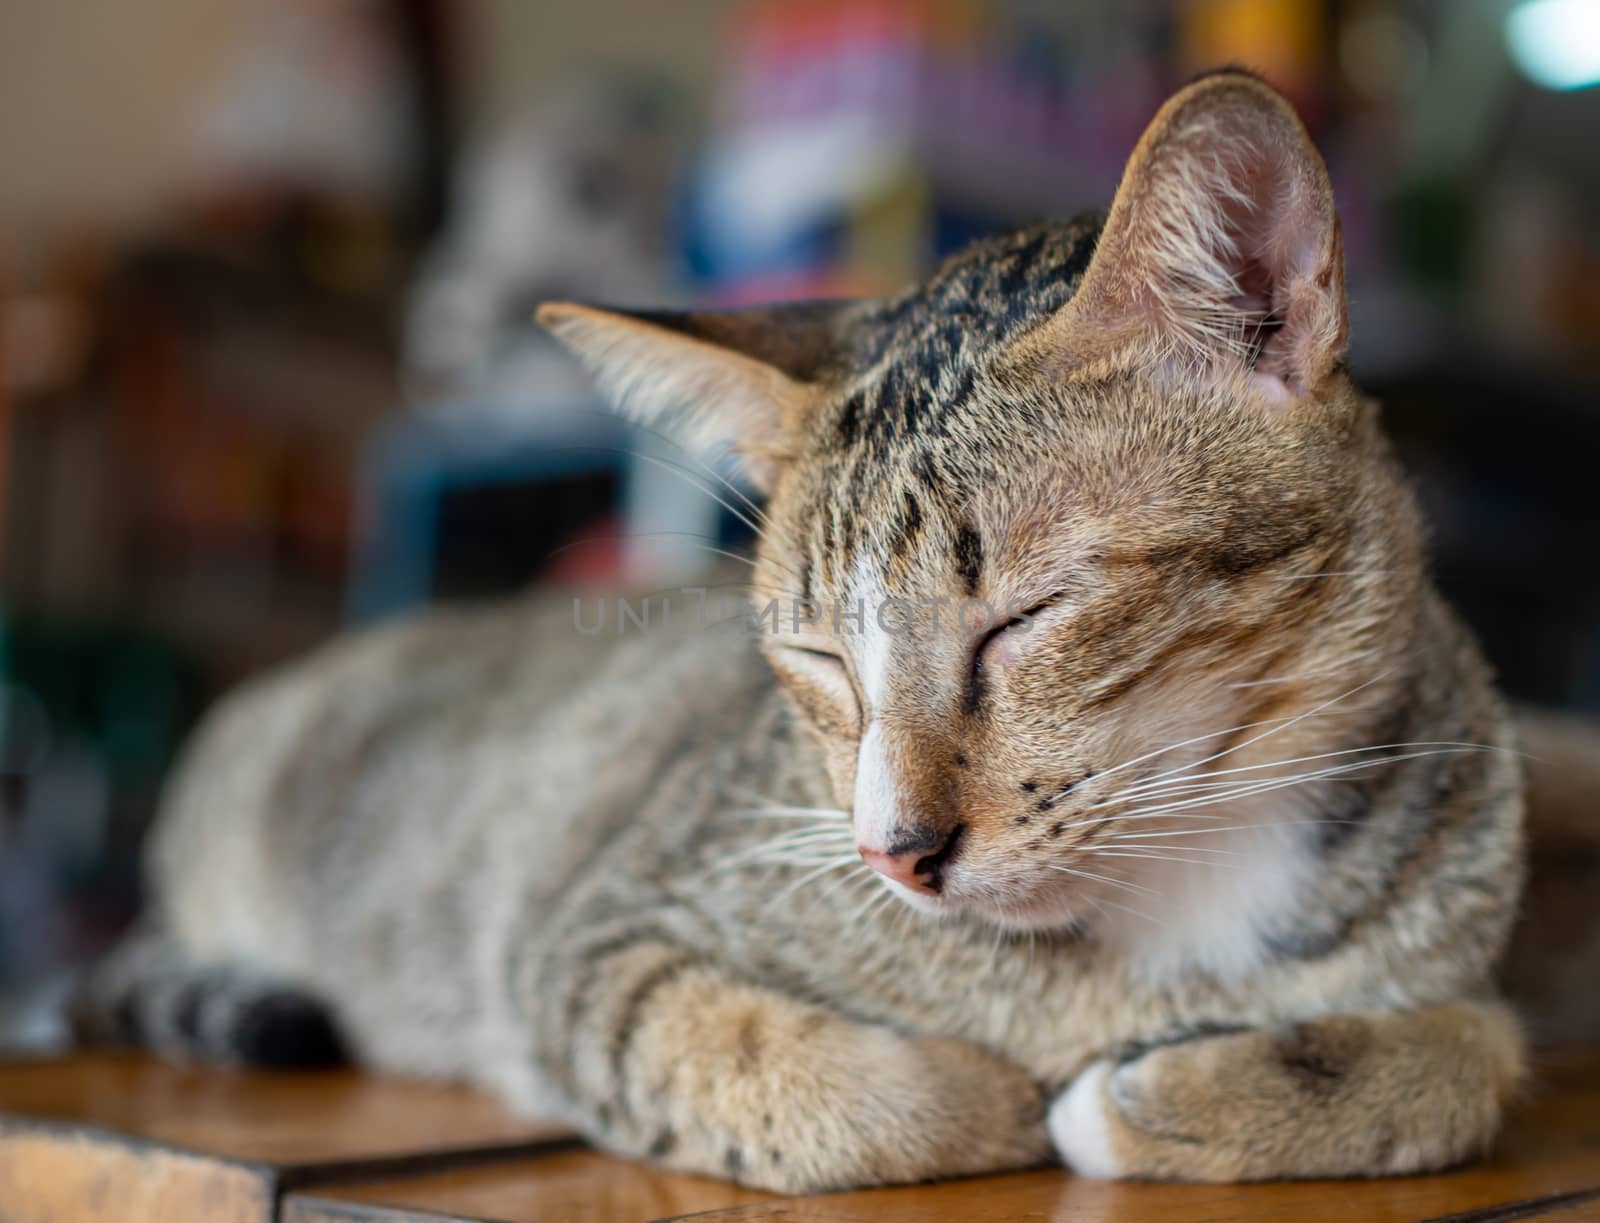 A cat sleeping on a wooden bed